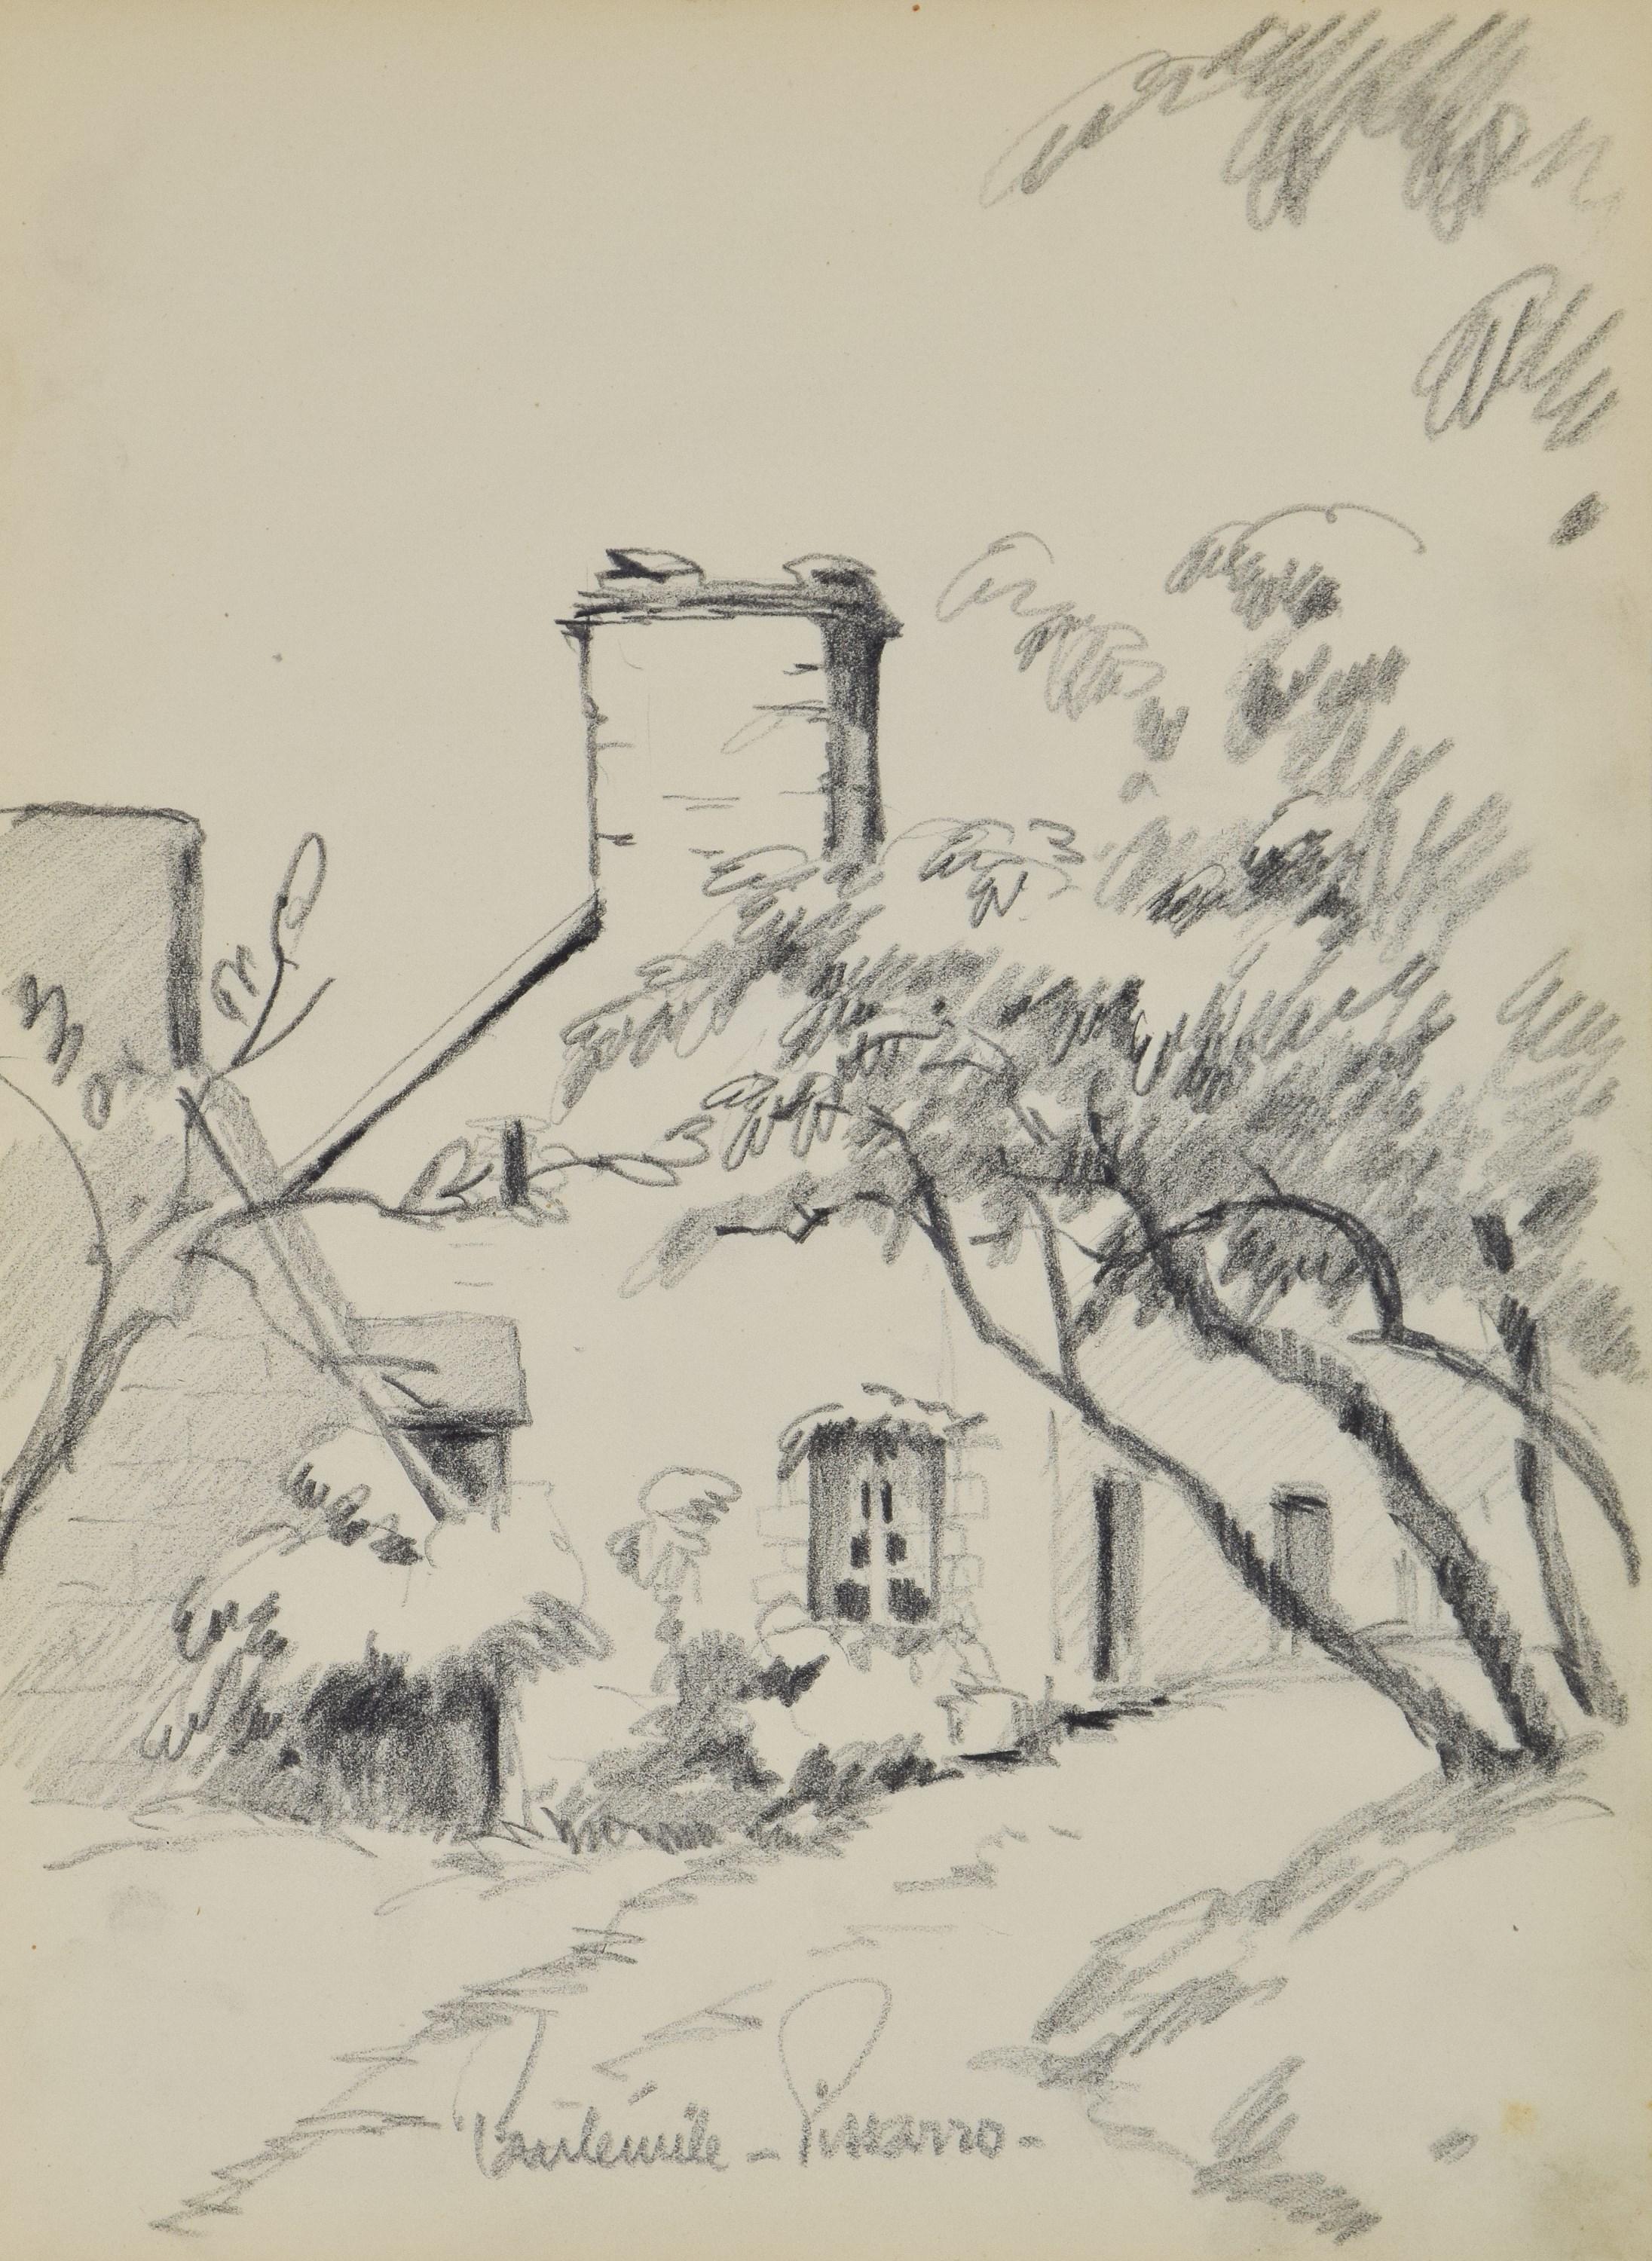 ARTWORK SOLD UNFRAMED

Paysage by Paulémile Pissarro (1884 - 1972)
Graphite on paper
32 x 23.5 cm (12 ⁵/₈ x 9 ¹/₄ inches)
Signed lower middle, Paulémile-Pissarro-
Executed circa 1934

This work is accompanied by a certificate of authenticity by